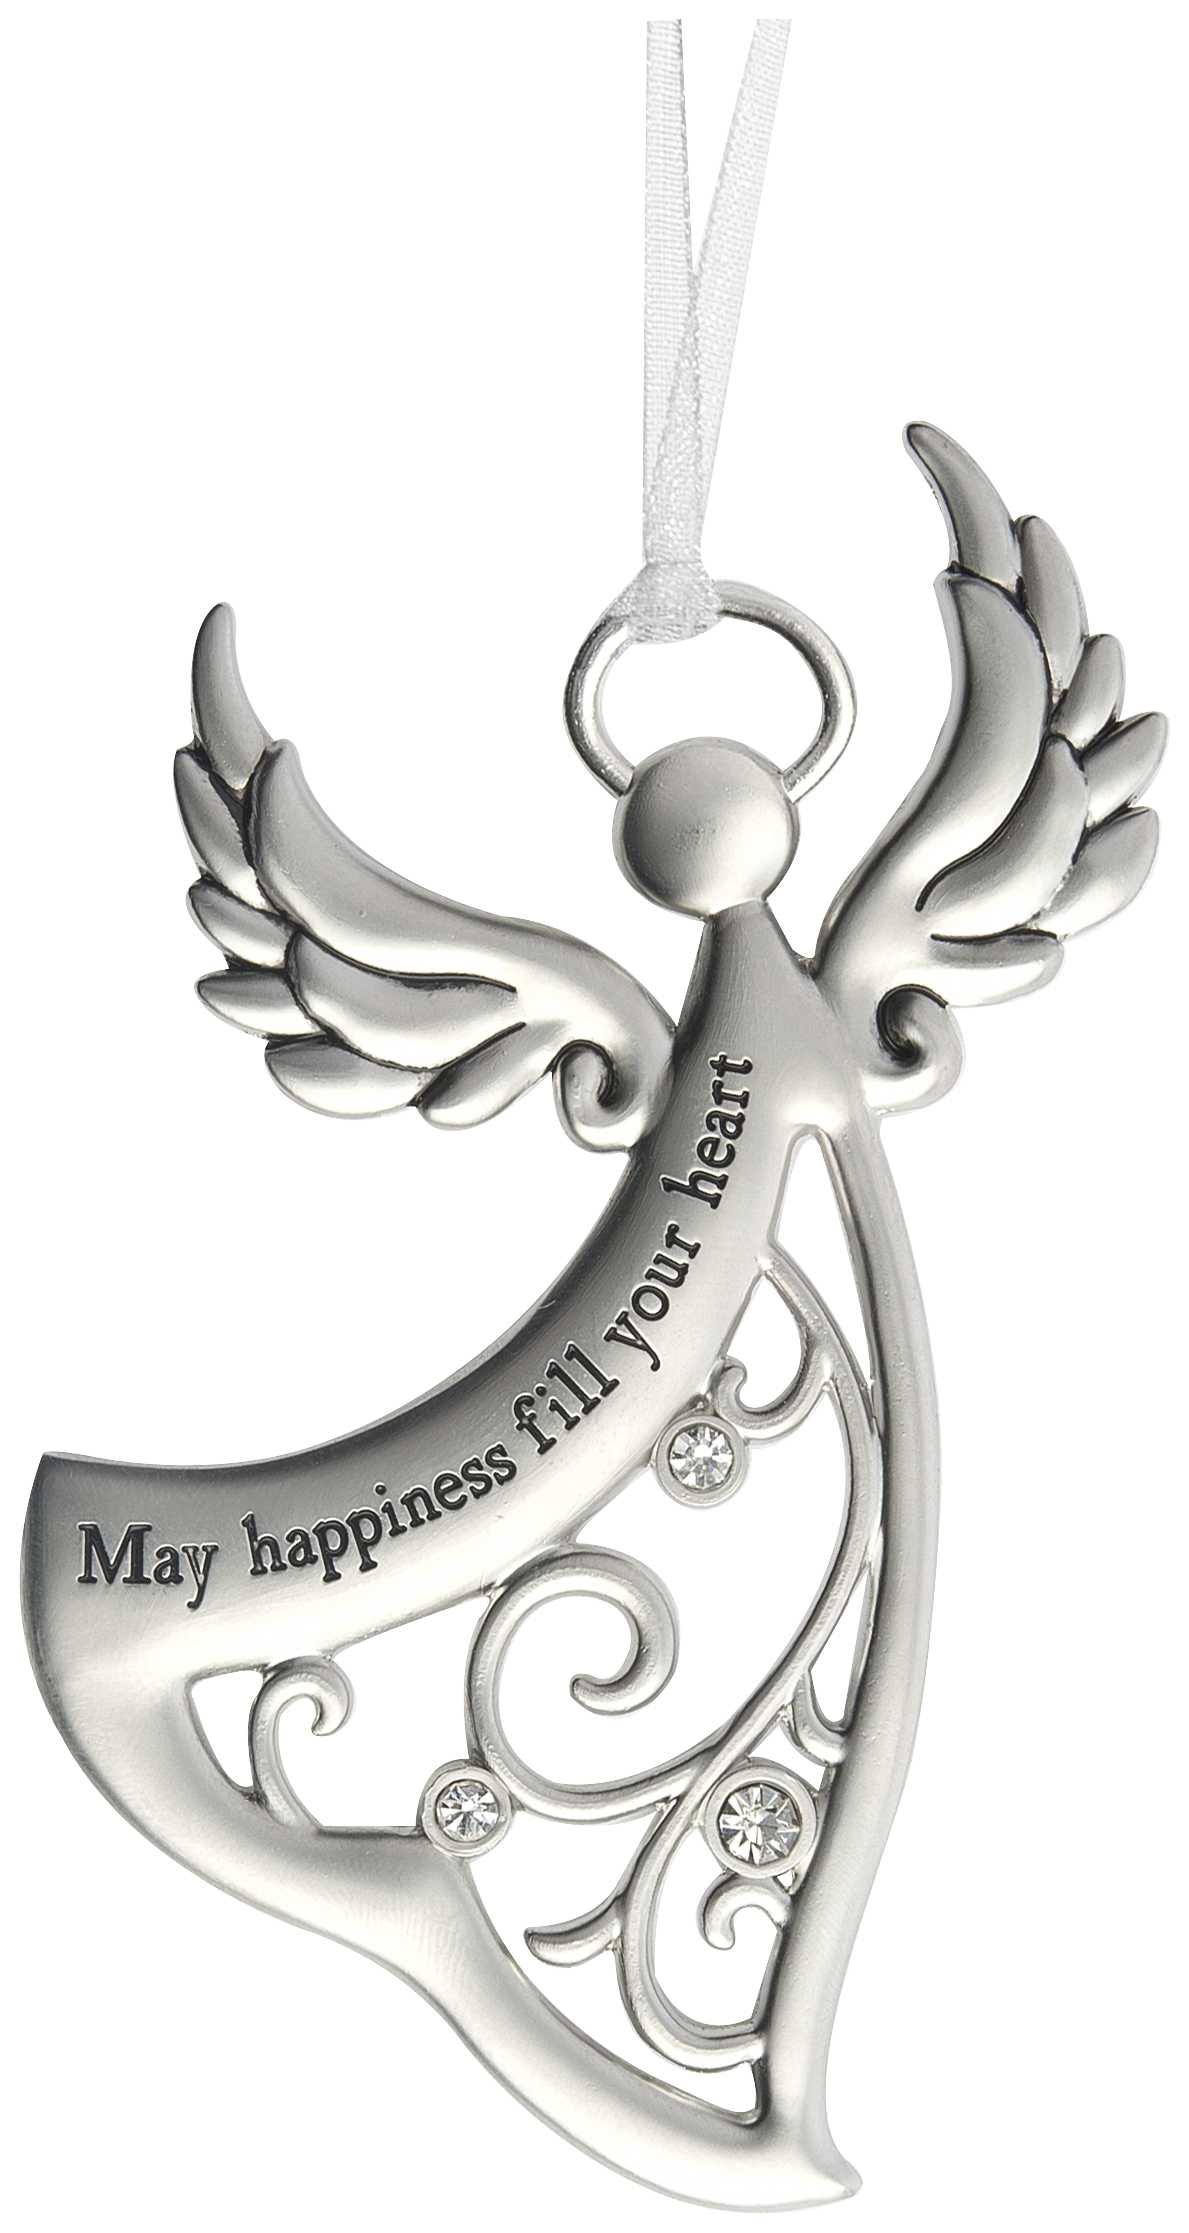 Ganz Angels By Your Side Ornament - May Happiness Fill Your Heart